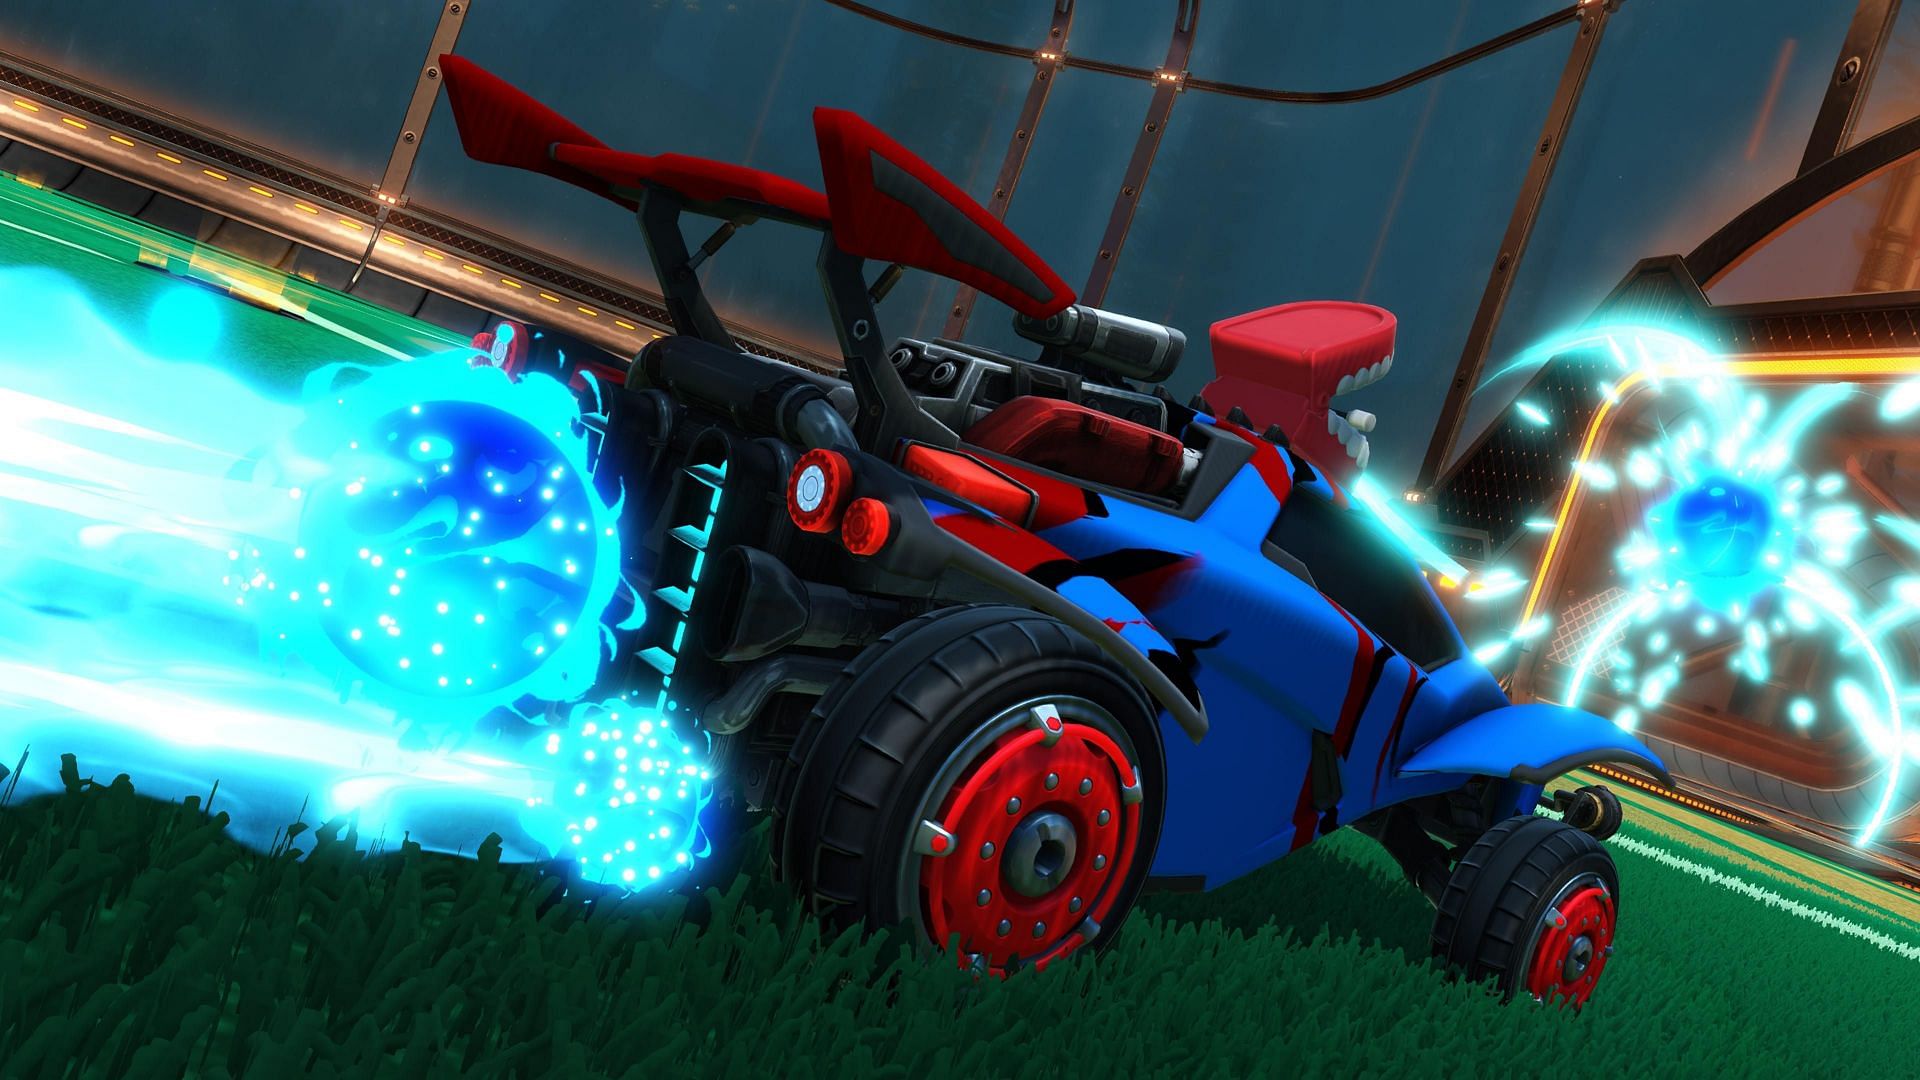 Rocket Racing vehicles might be coming to LEGO Fortnite (Image via Epic Games/Rocket League)